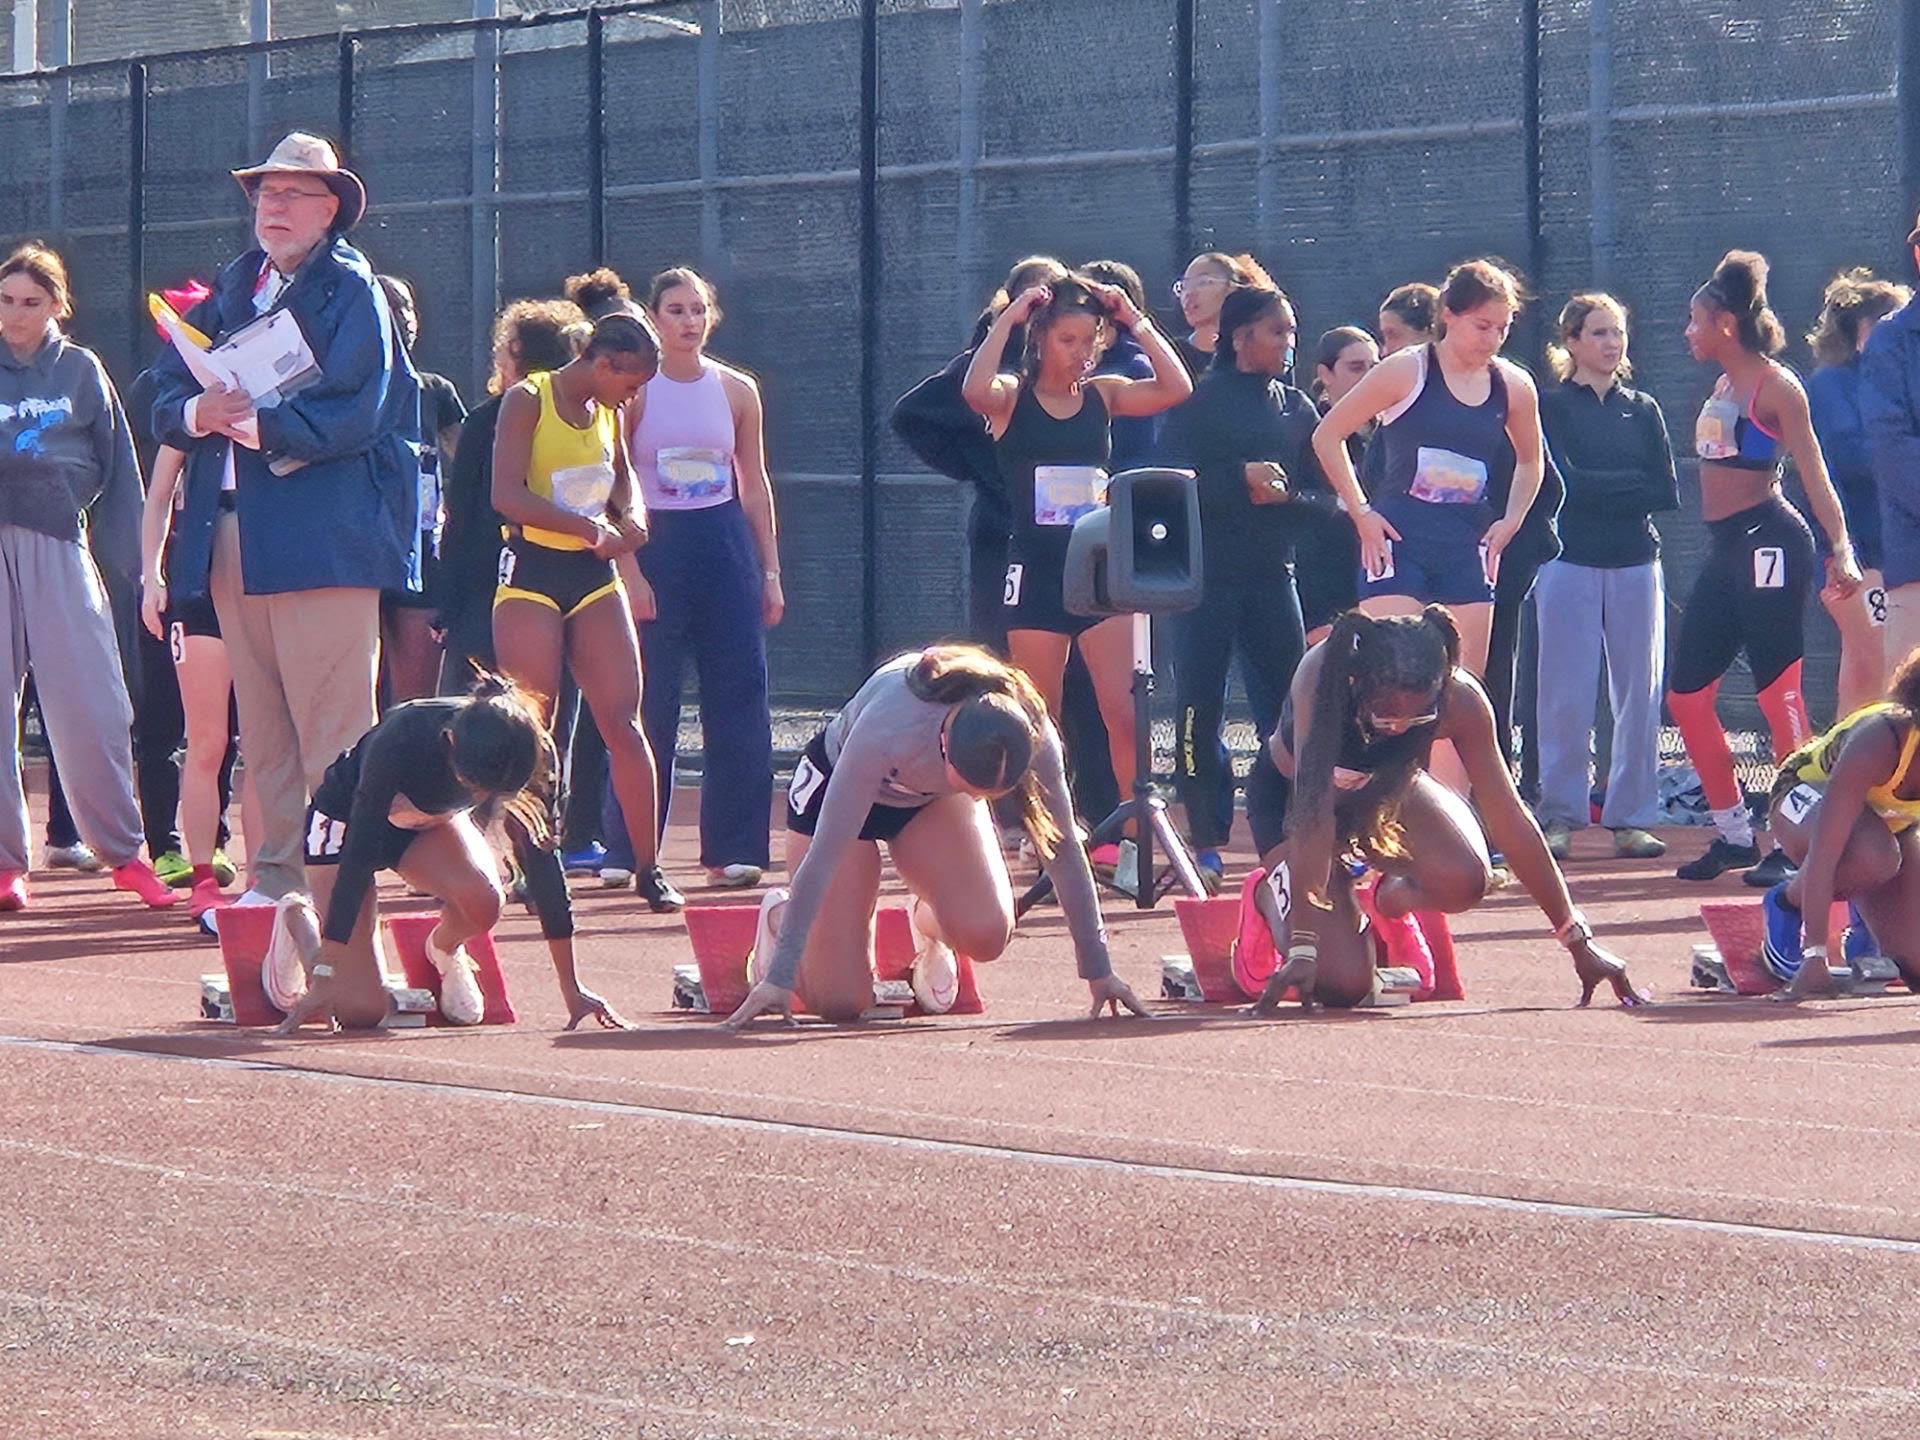 Impressive Performances by Student-Athletes at Winter T&F Championship